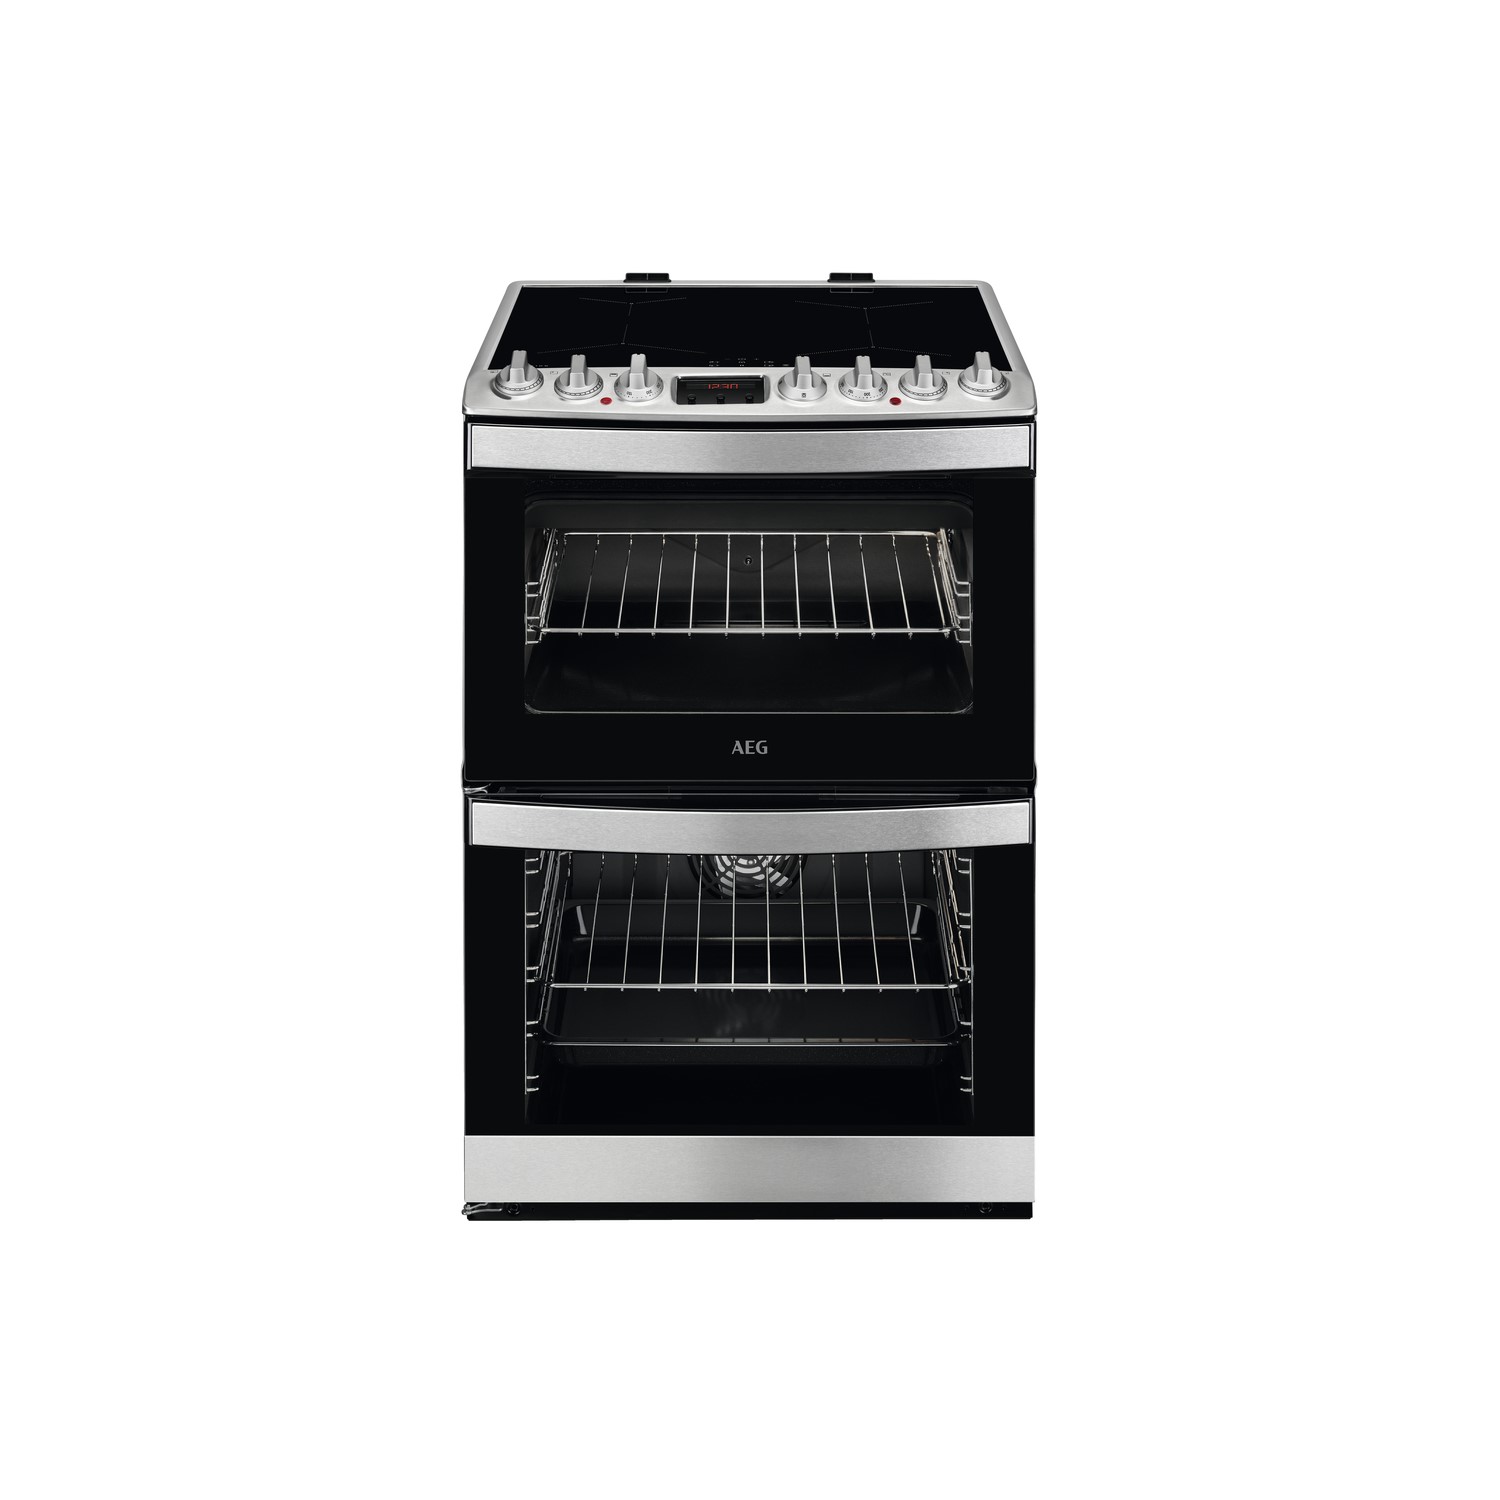 AEG Electric 60cm Double Oven Cooker with Induction Hob - Stainless Steel